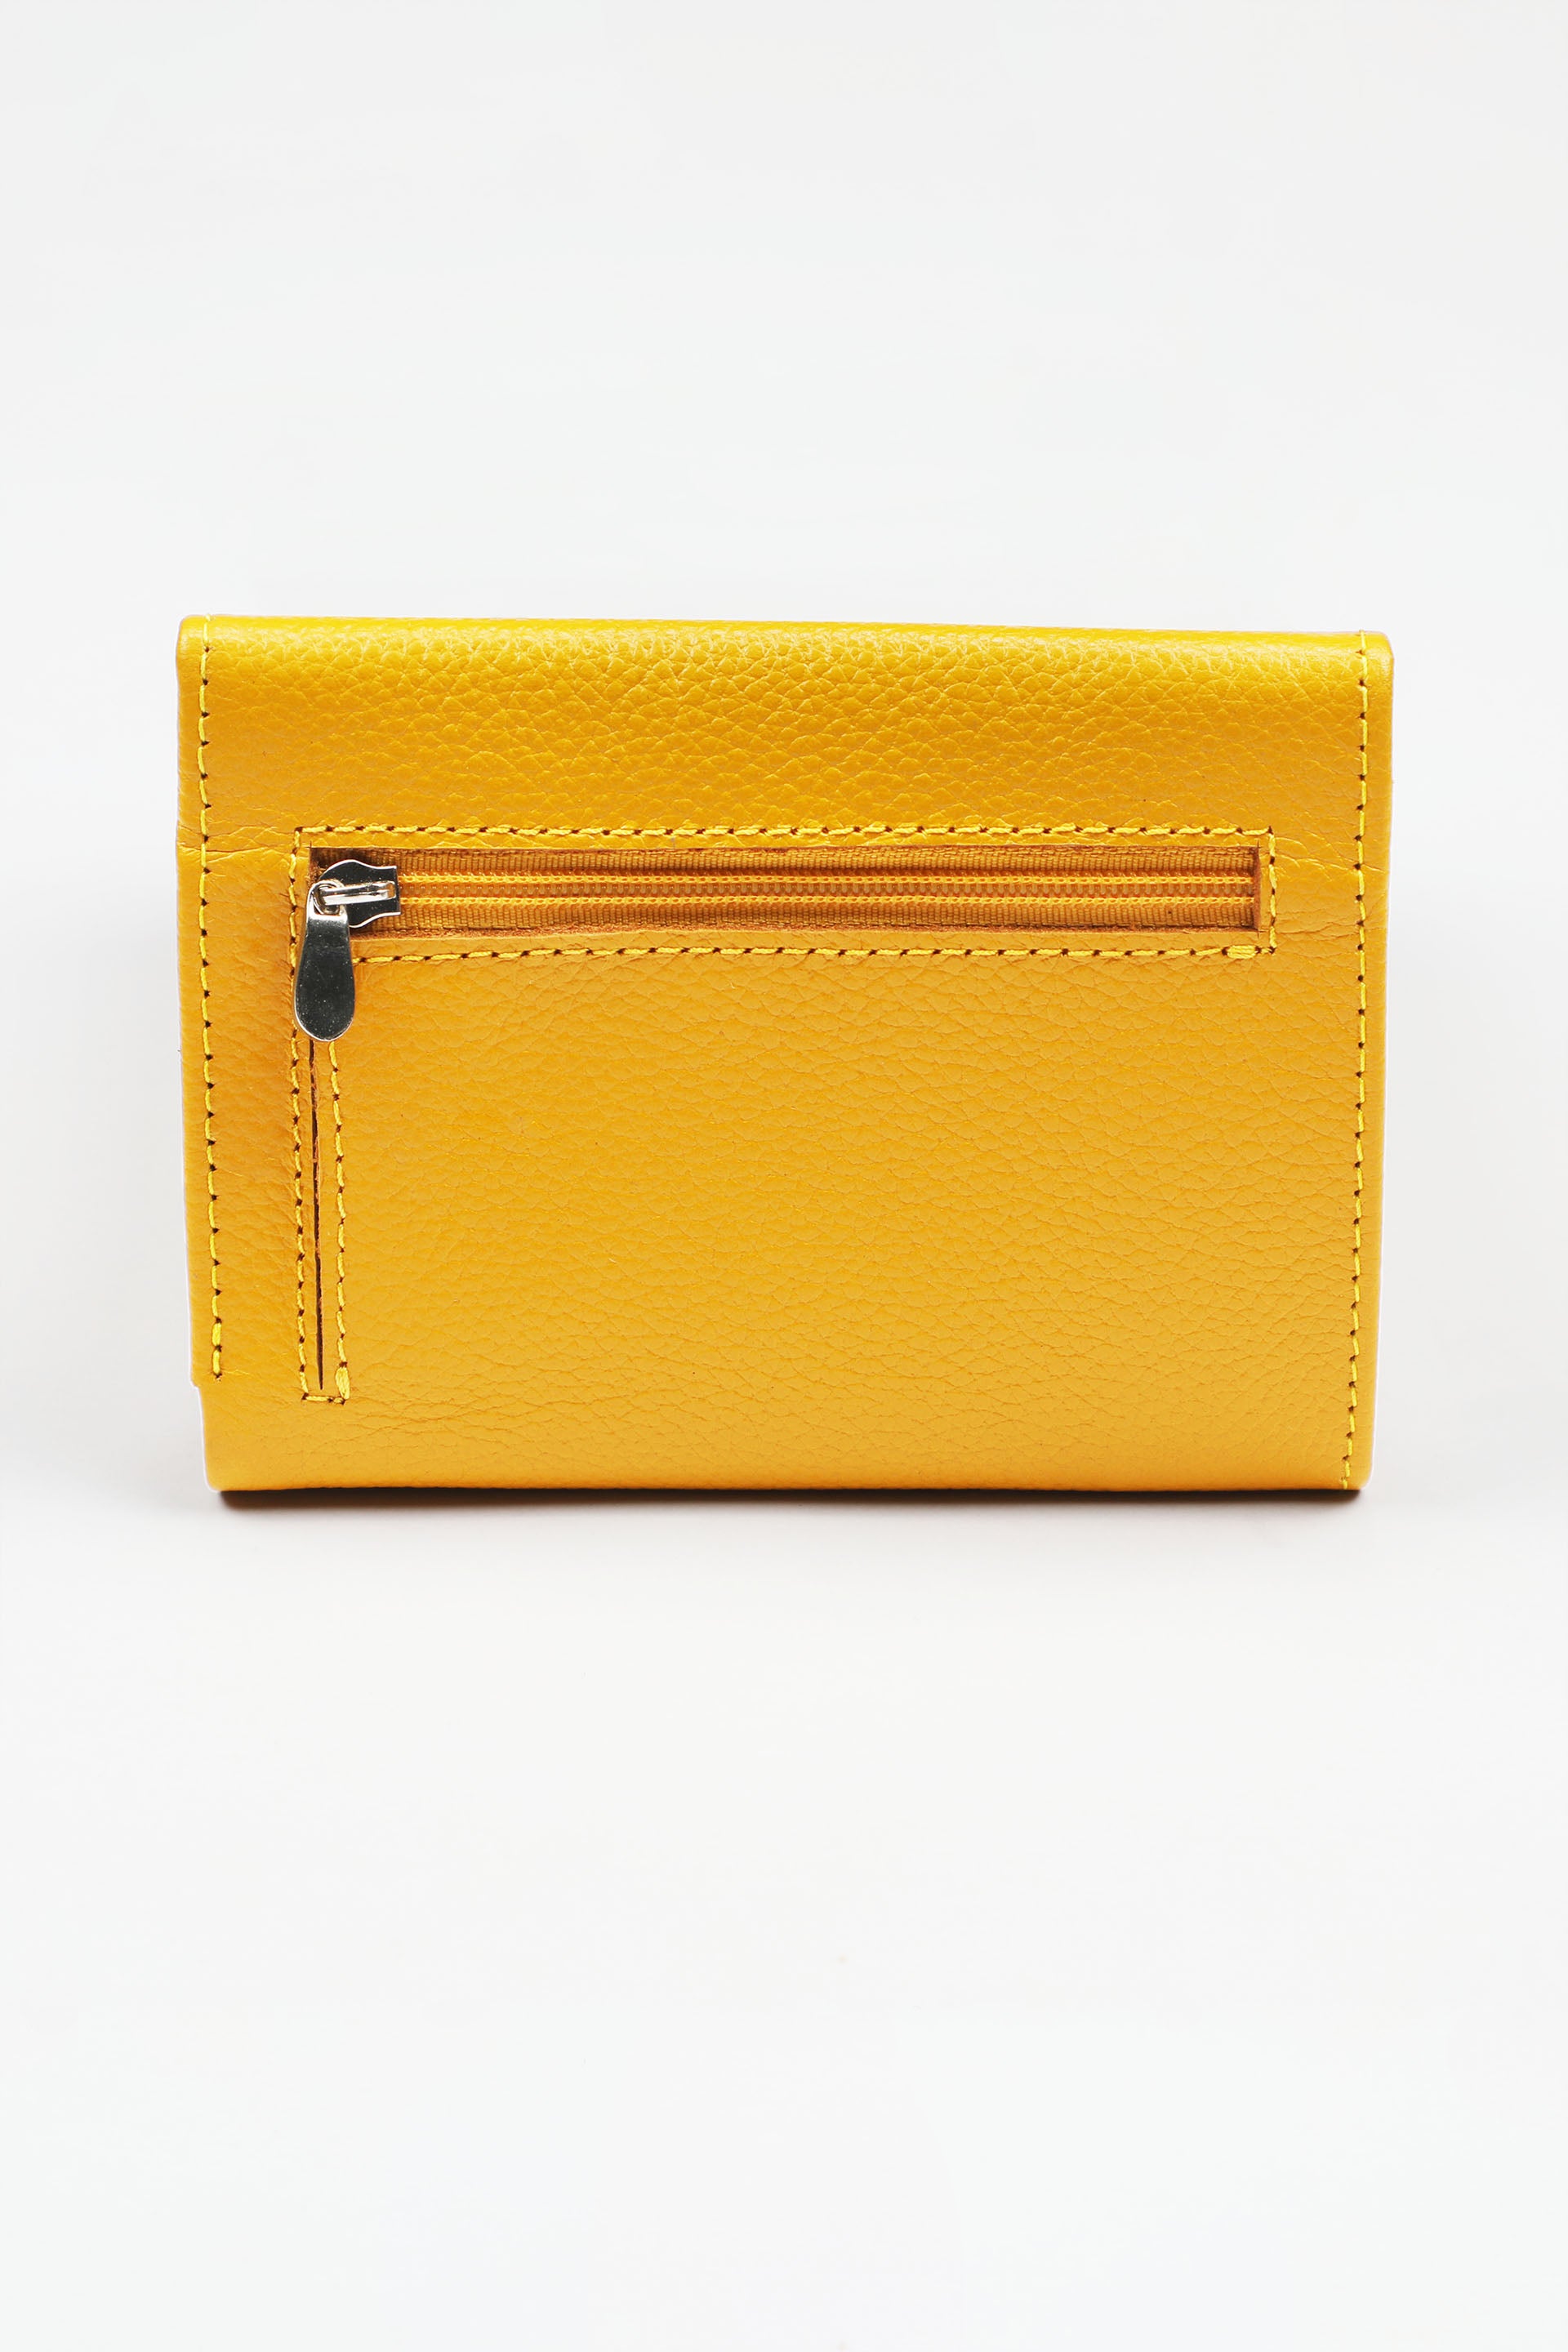 Purse Wallet Yellow – ONE